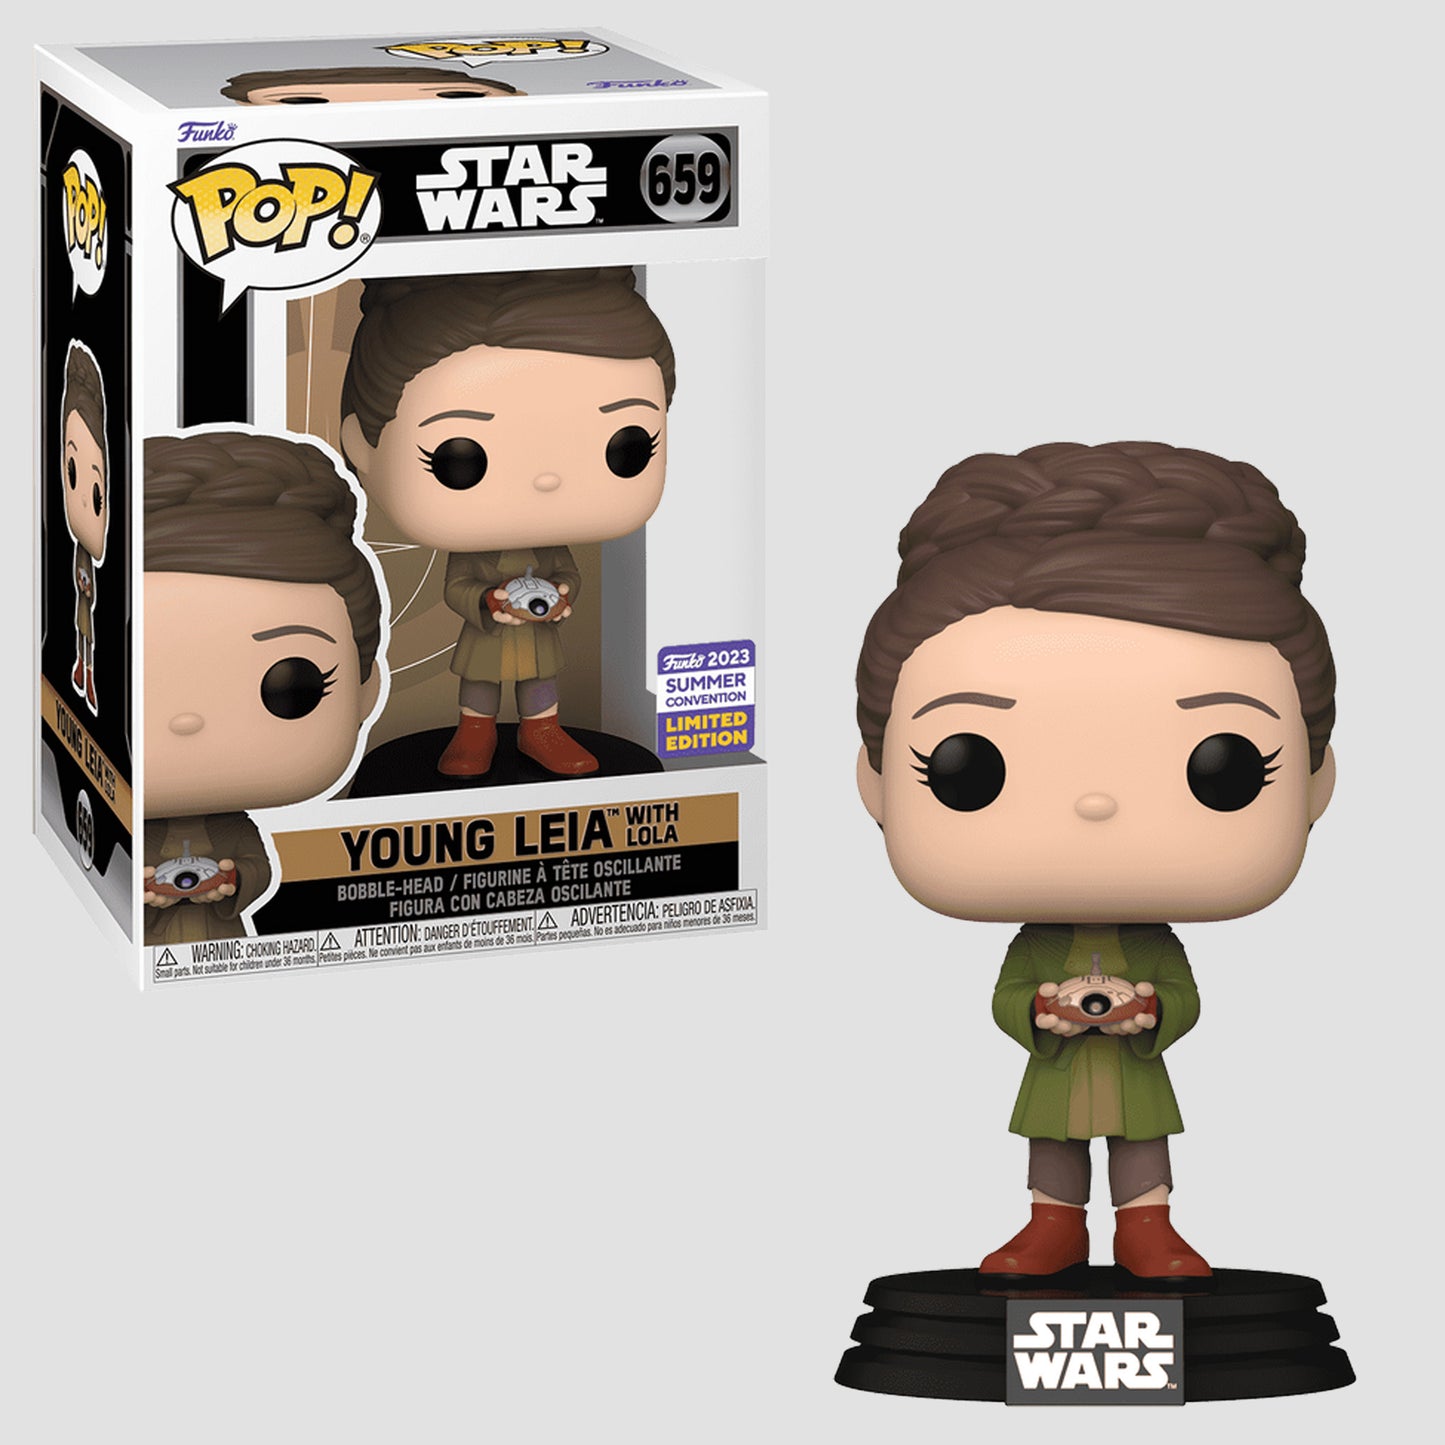 Young Princess Leia with LOLA (Star Wars) 2023 Summer Convention Limited Edition Funko Pop!